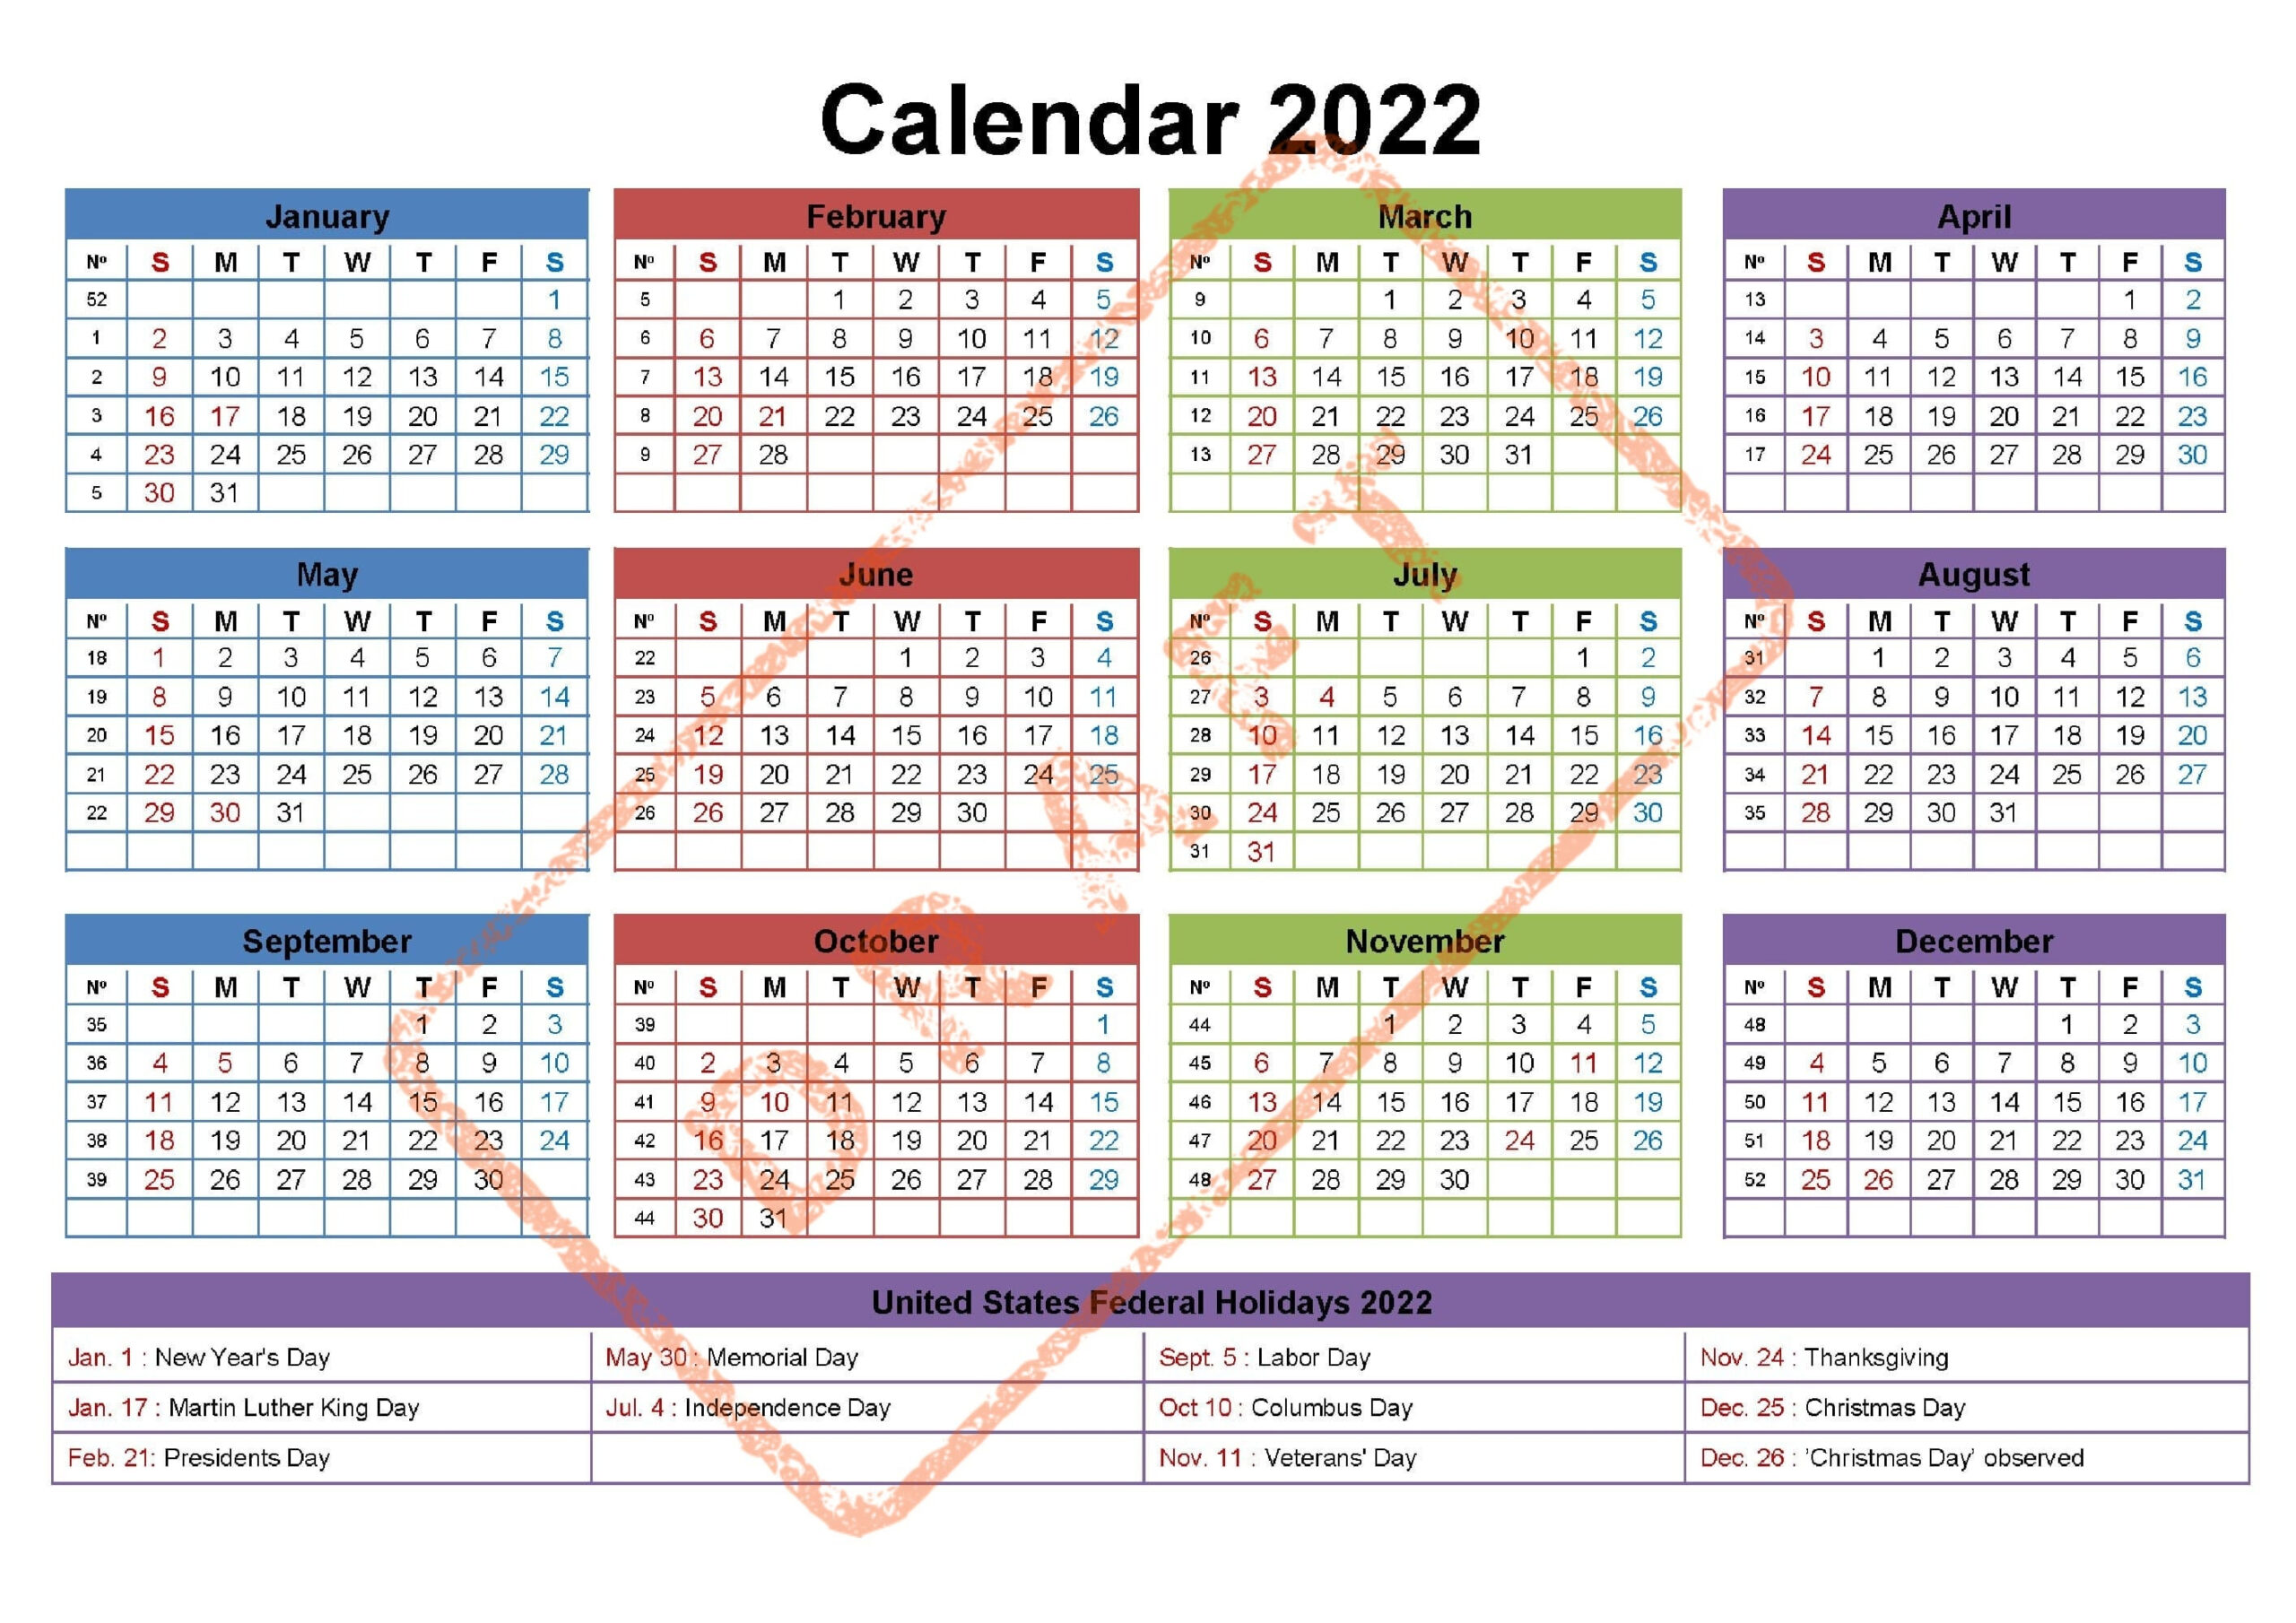 2022 Calendar Printable With Federal Holidays Yearly | Etsy pertaining to Printable Federal Government Holiday Calendar